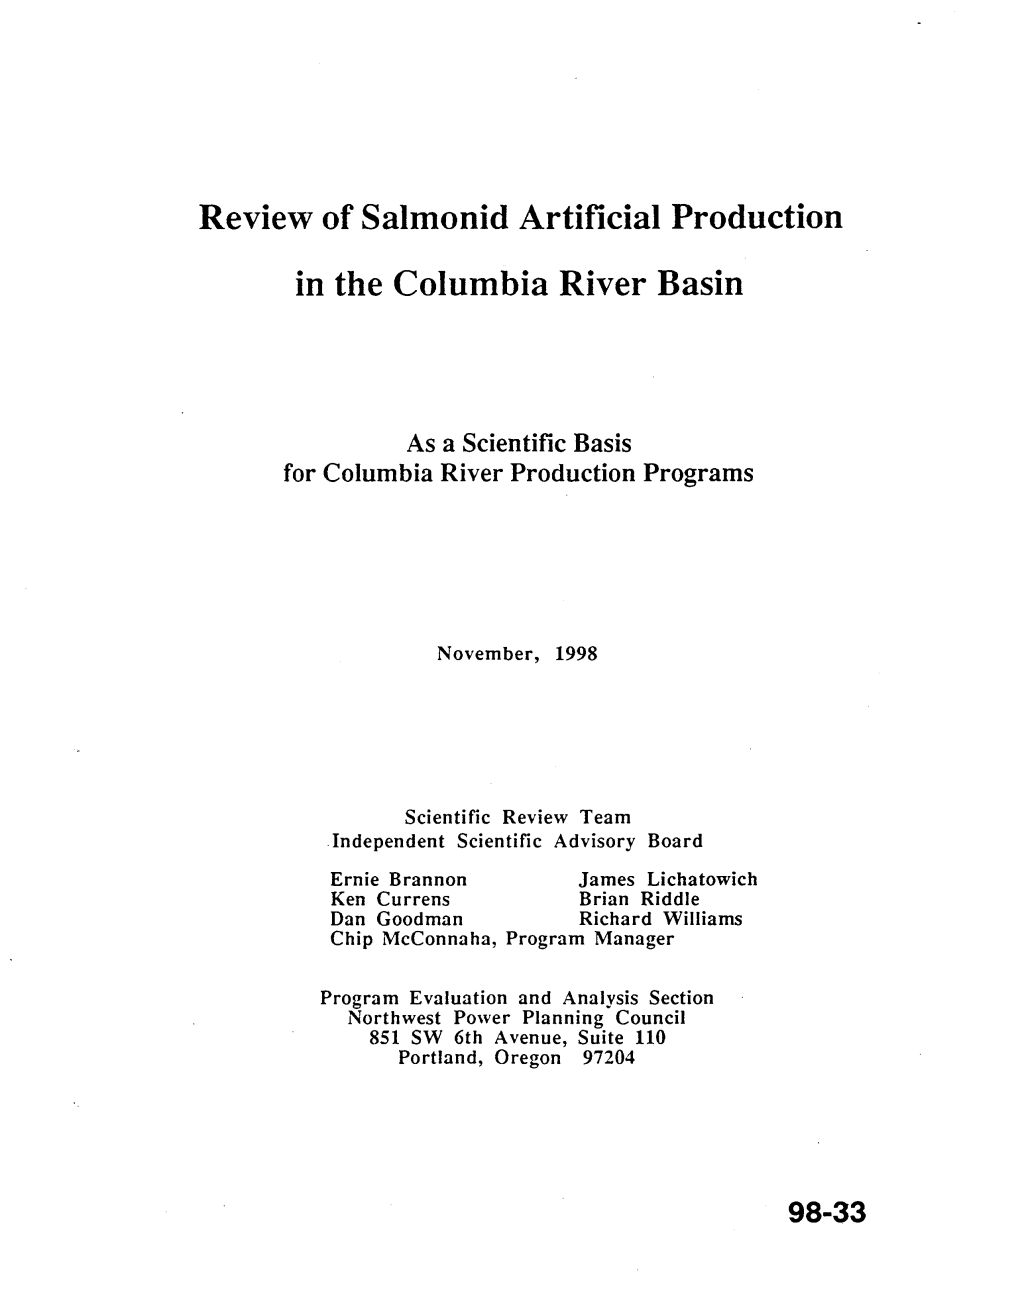 Review of Salmonid Artificial Production in the Columbia River Basin